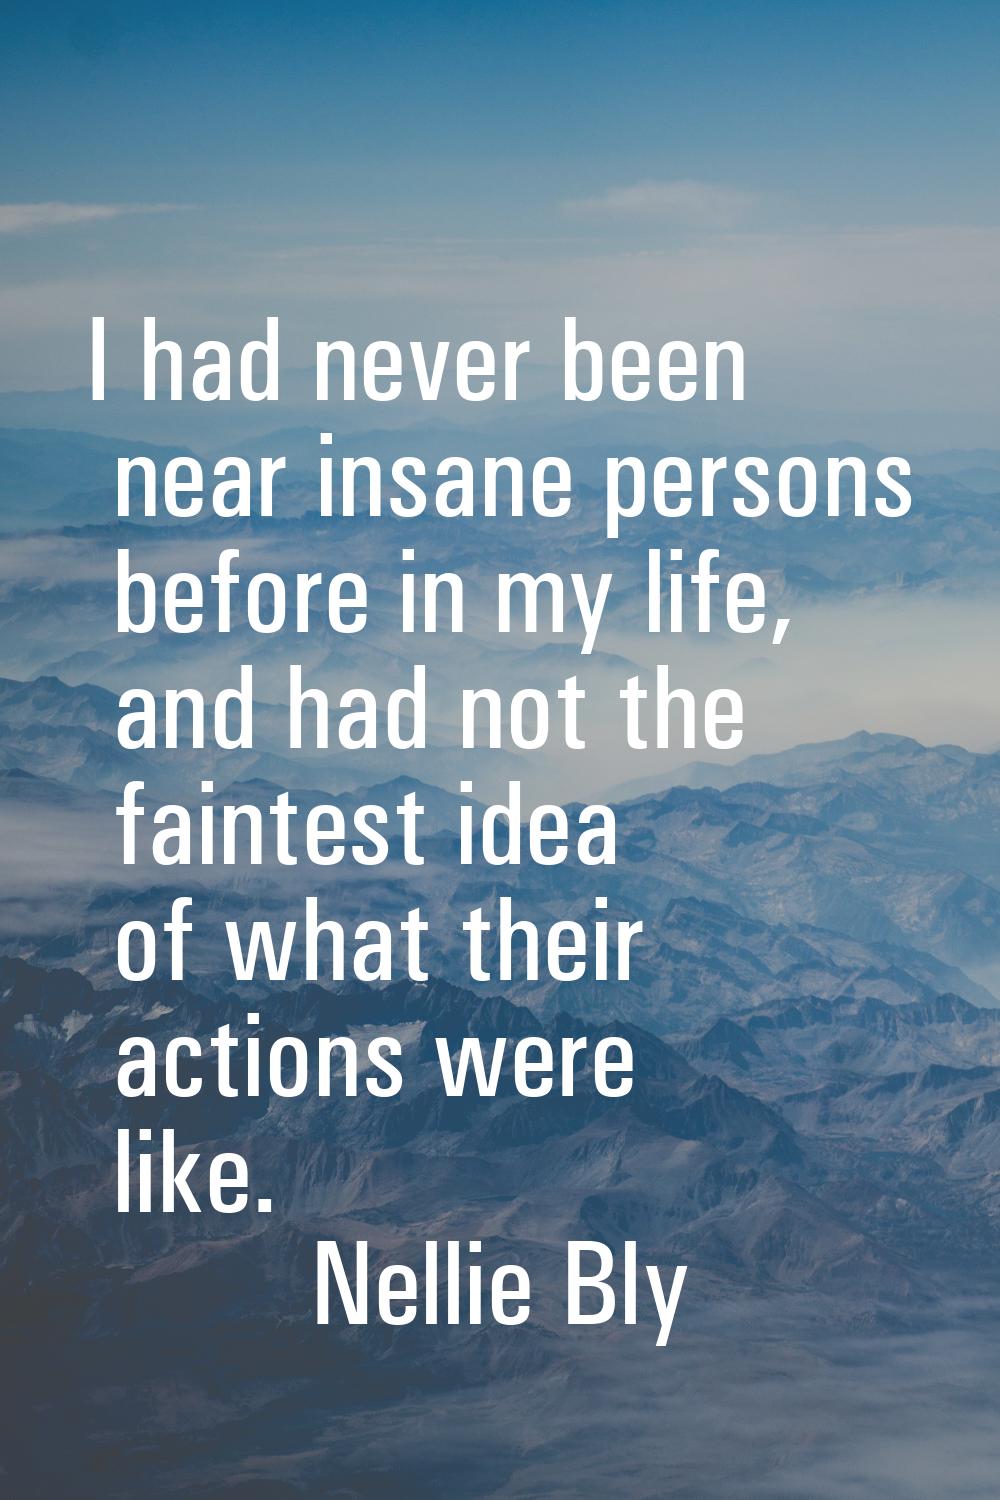 I had never been near insane persons before in my life, and had not the faintest idea of what their